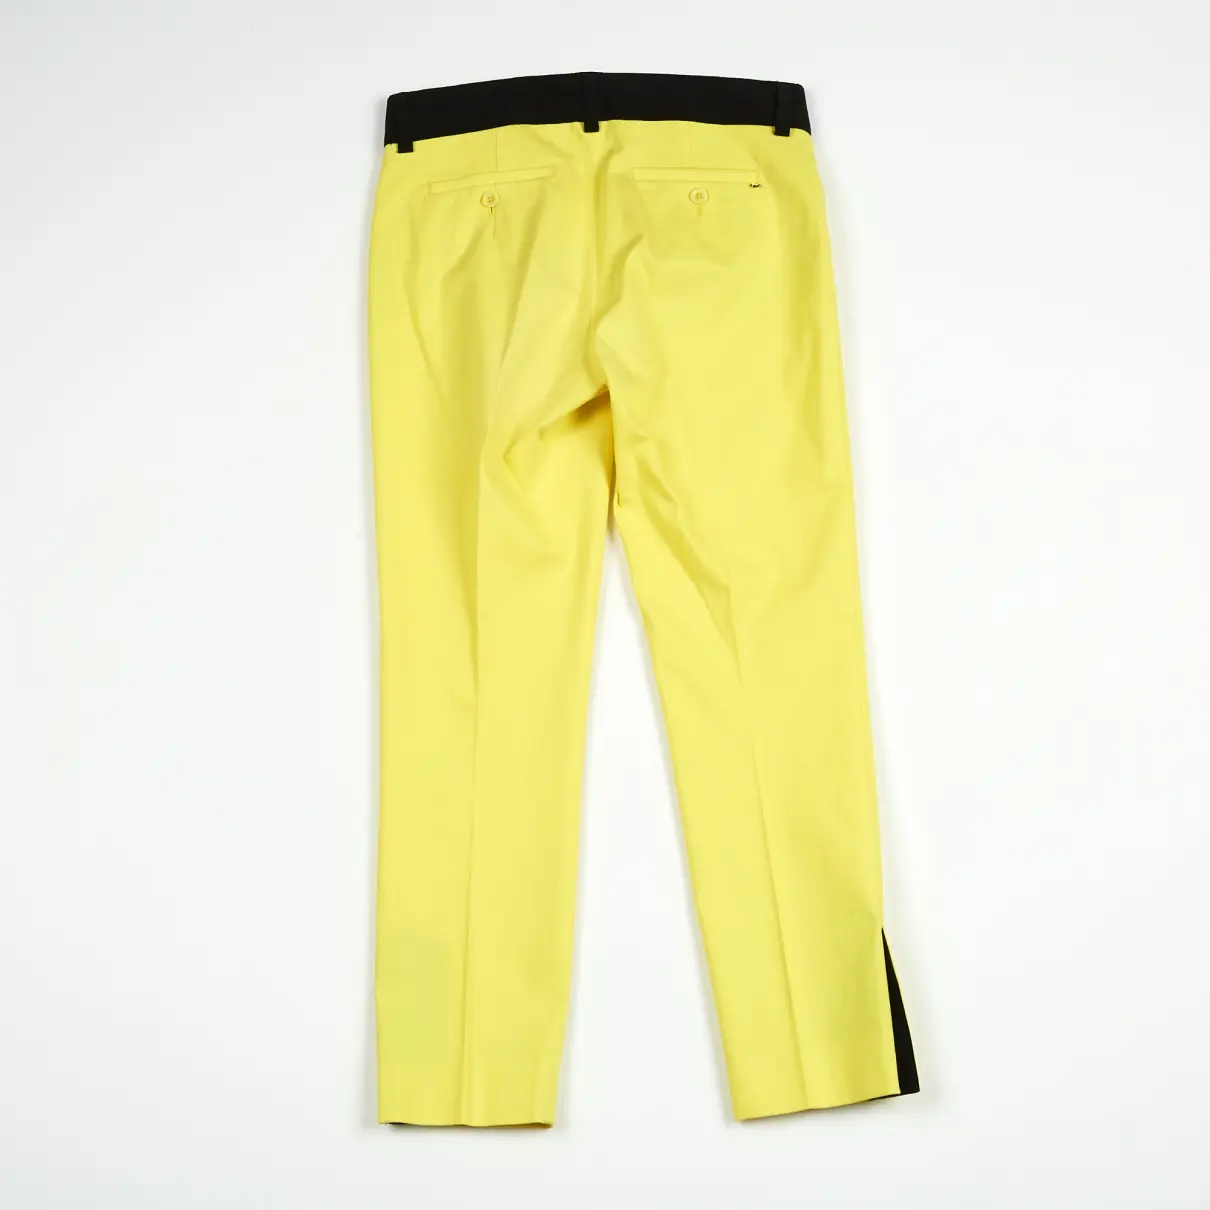 Sportmax SHORT TROUSERS for sale